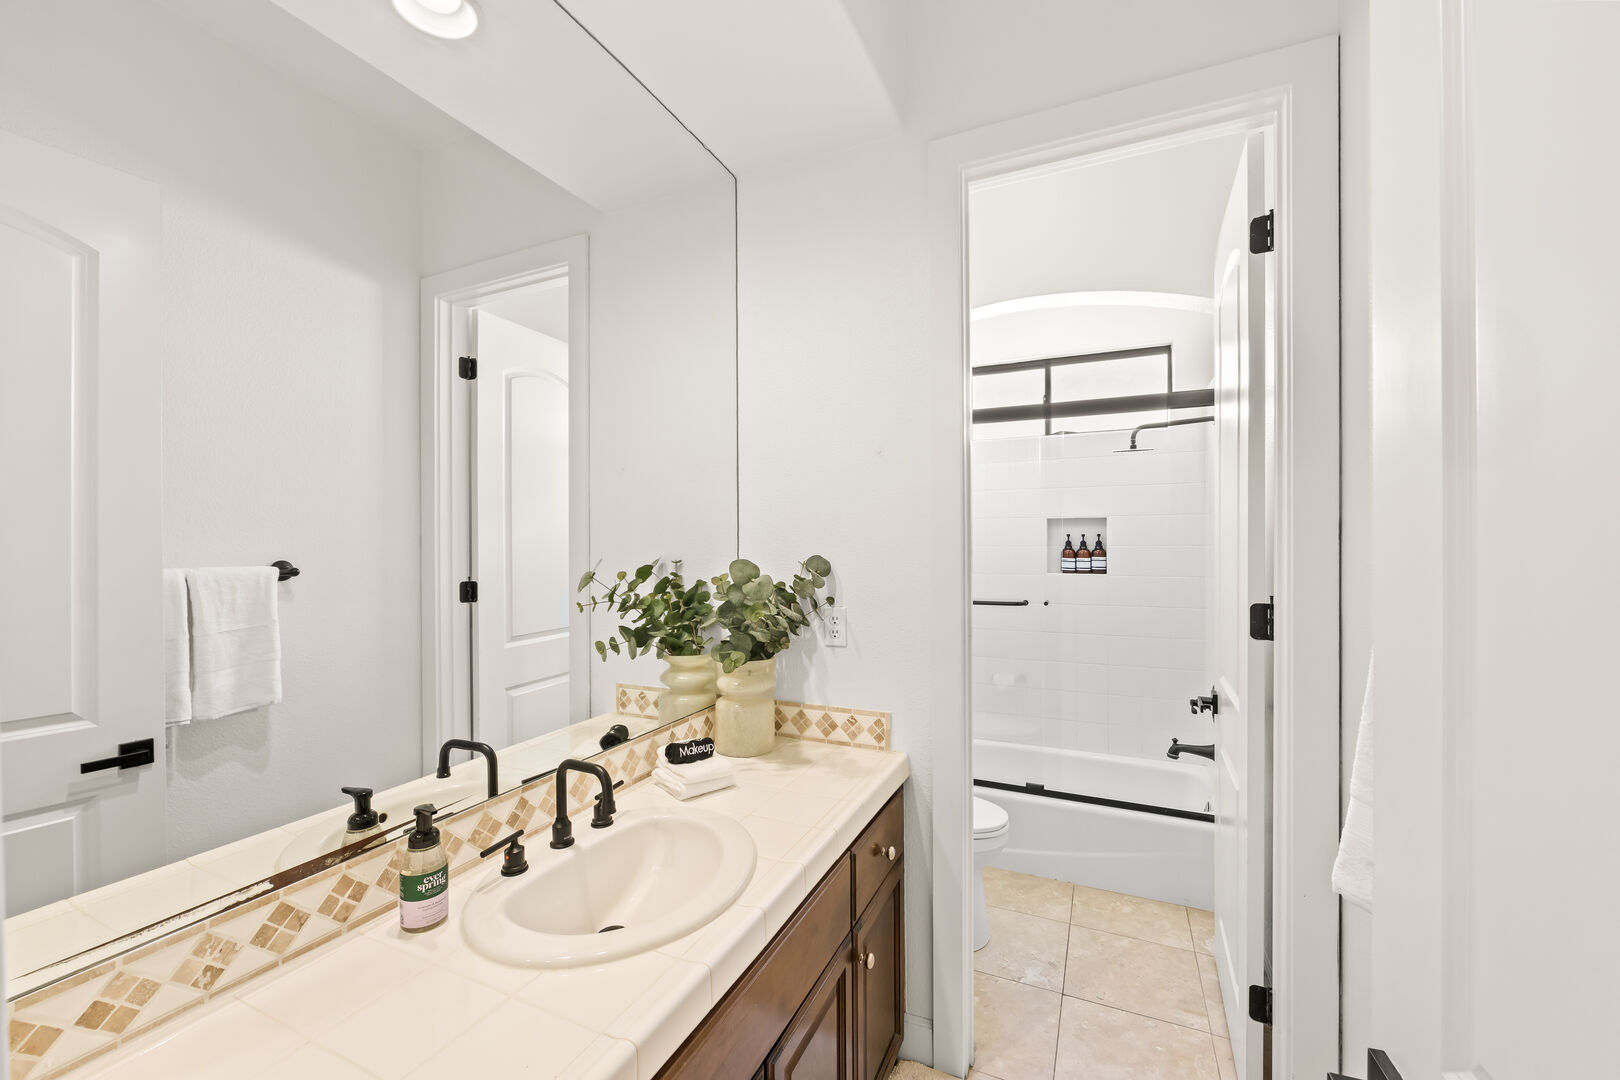 The hallway bathroom is located next to the laundry room and features a bathtub shower combo with a decorative vanity sink.